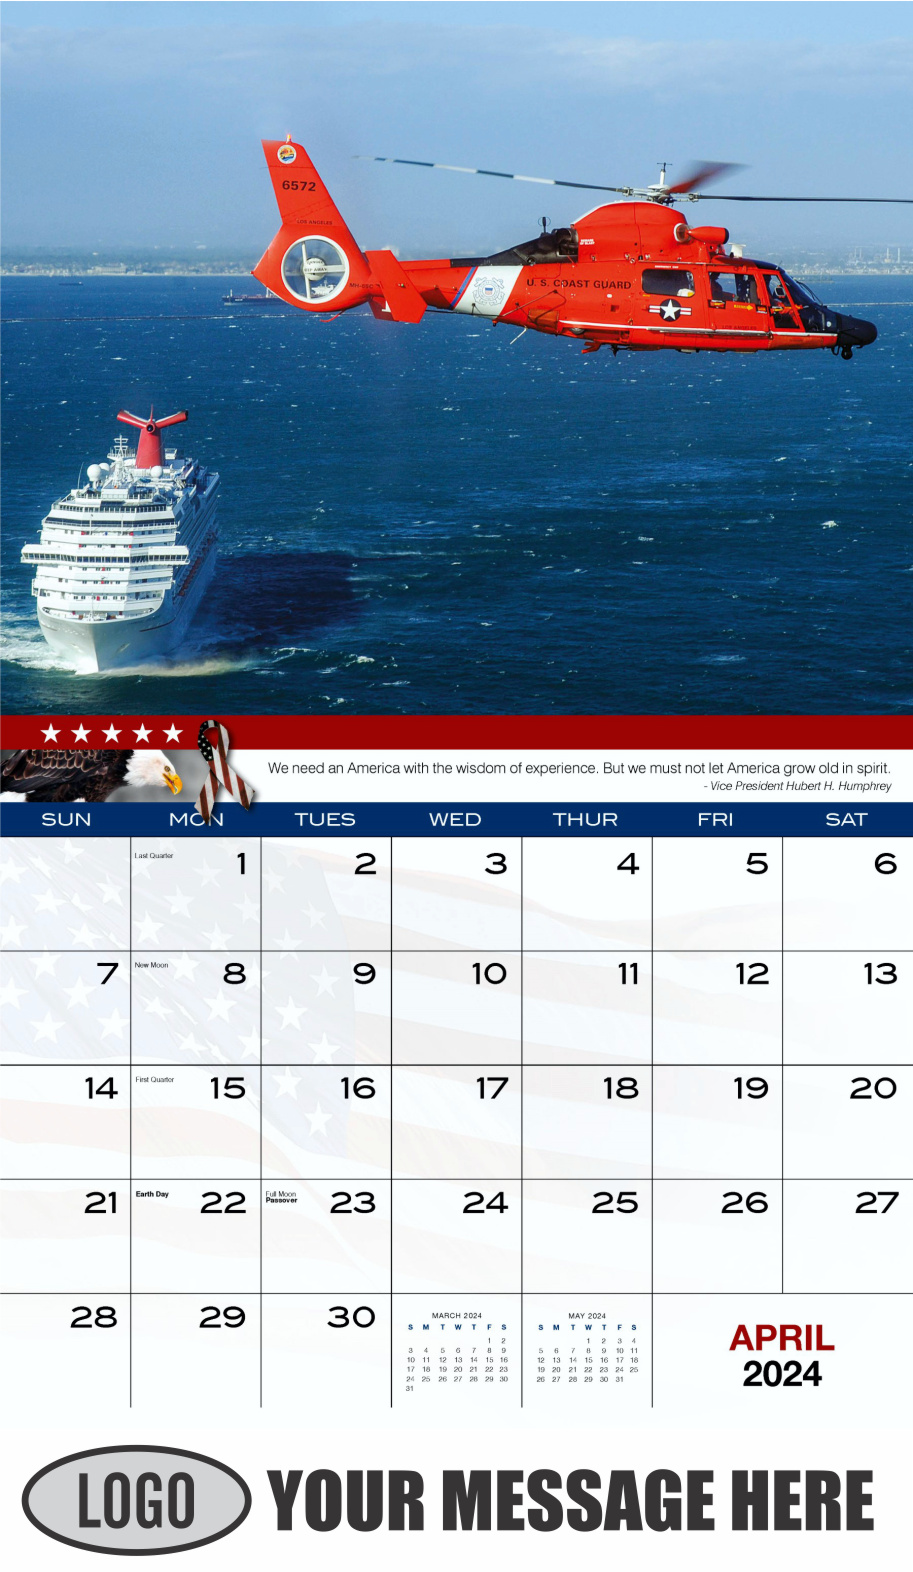 Home of the Brave 2024 USA Armed Forces Business Promo Calendar - April